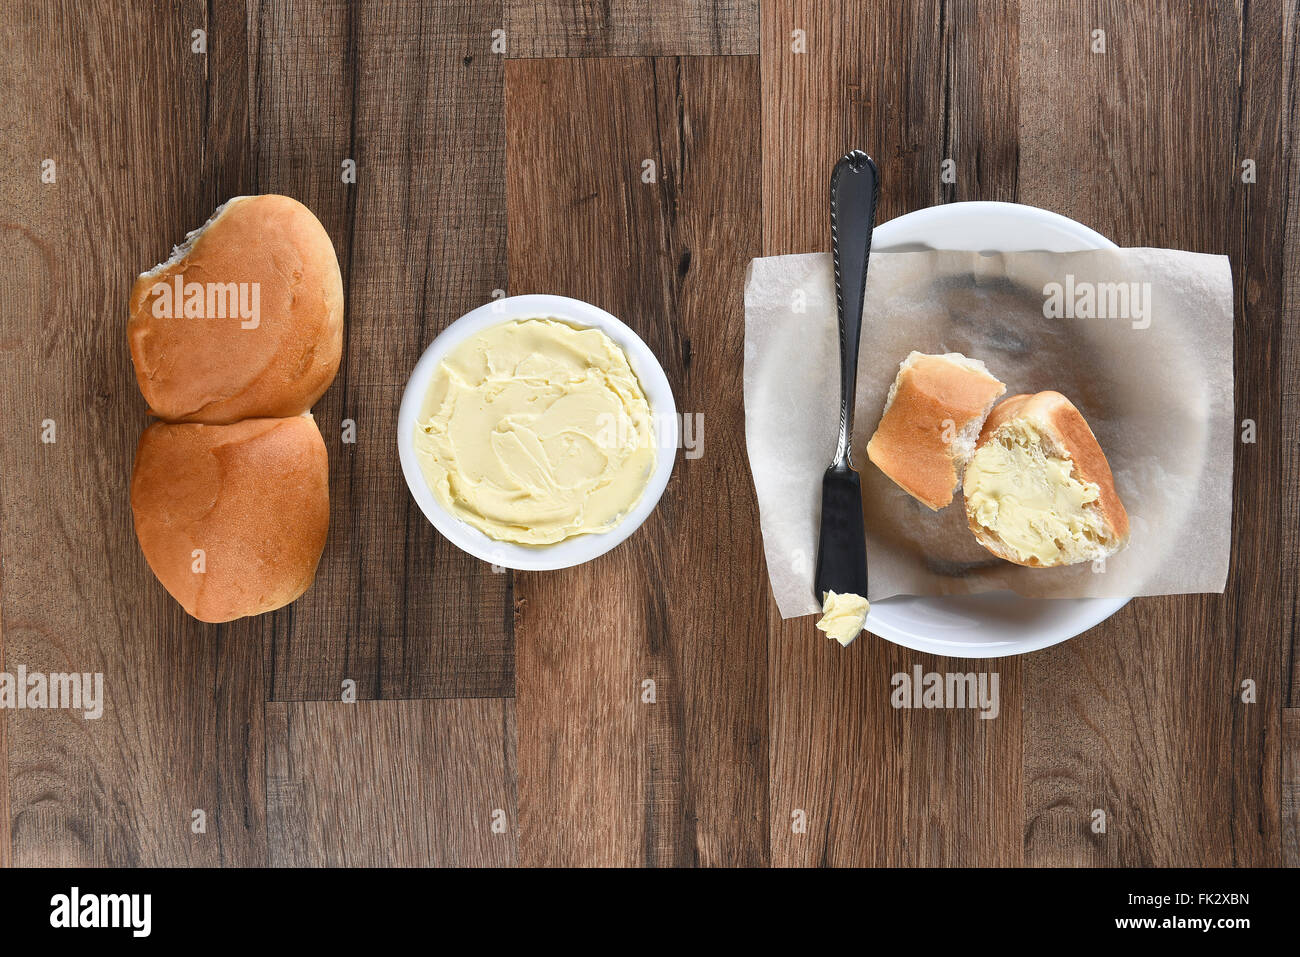 Overhead view of Dinner rolls Bread Plate and Butter Crock on a rustic wood table. Stock Photo